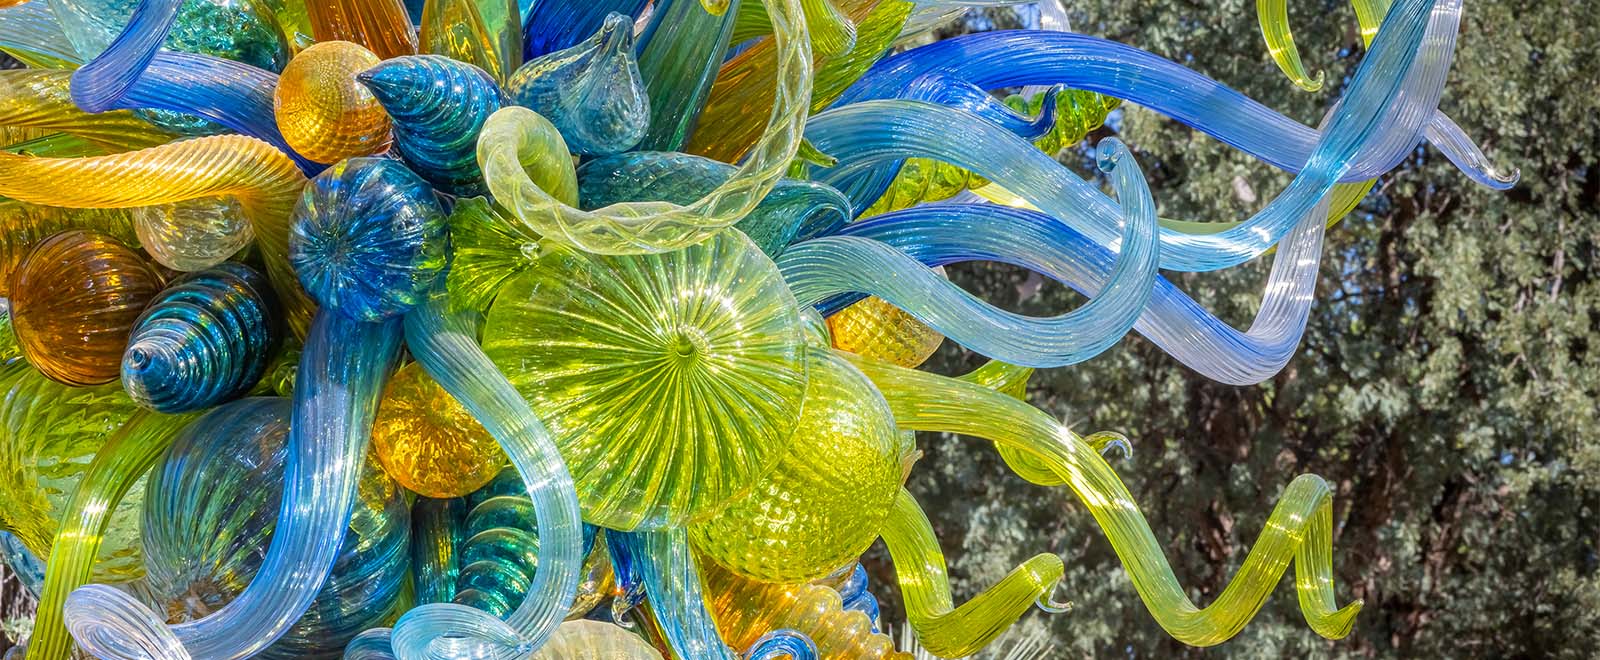 CHIHULY IN THE DESERT